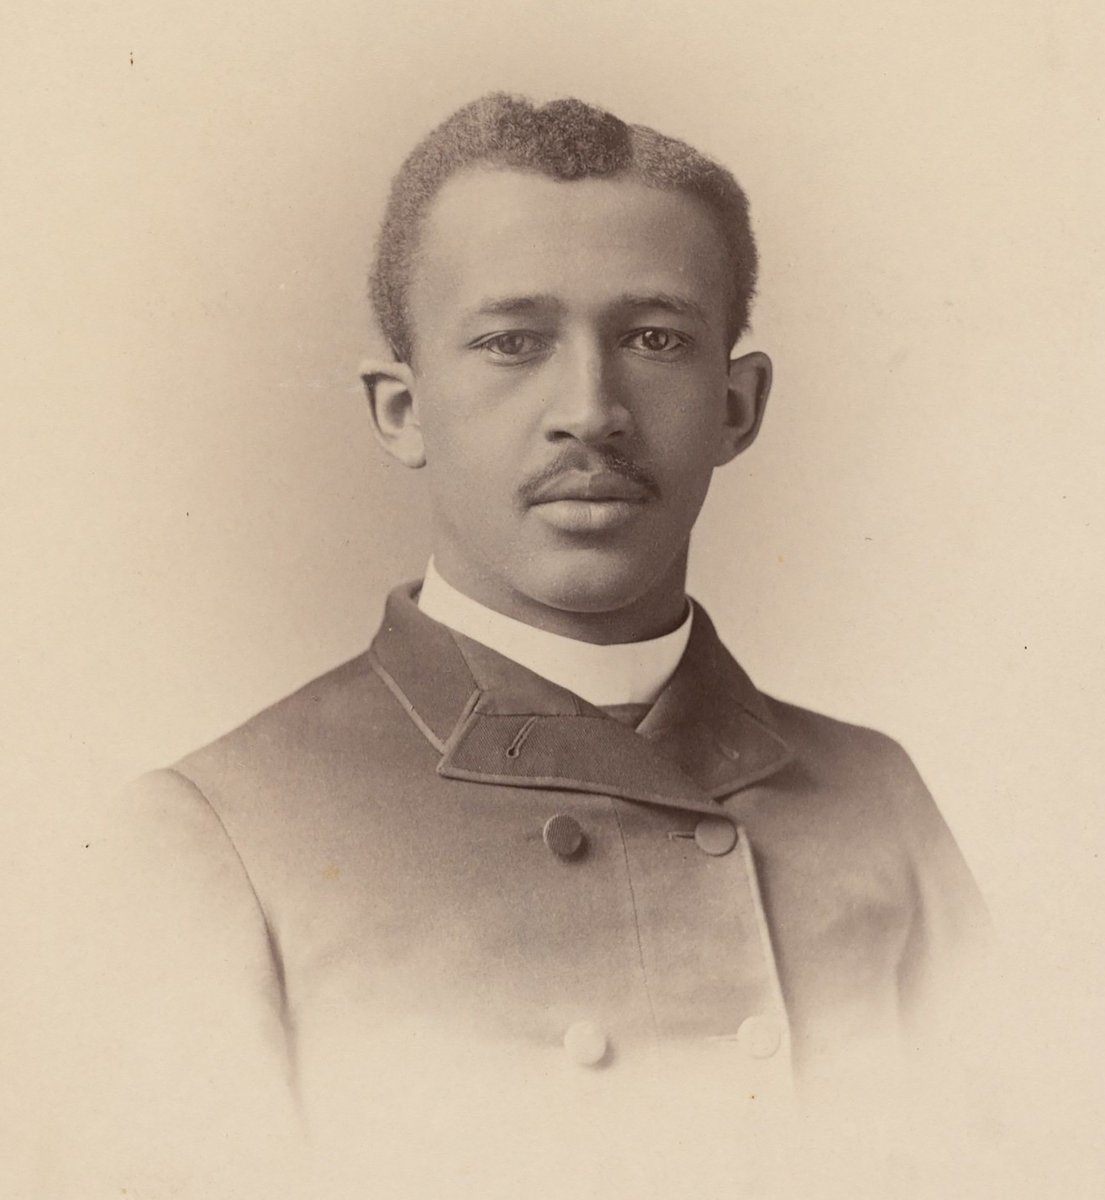 #OTD: February 23. 1868—Dr. #WEBDuBois, a pioneering social theorist and one of the founders of the #NAACP, was born in Great Barrington, Massachusetts. (Du Bois’ photograph from the Harvard College Class of 1890 Class Book/Harvard University/Pach Bros., New York, New York) #BHM